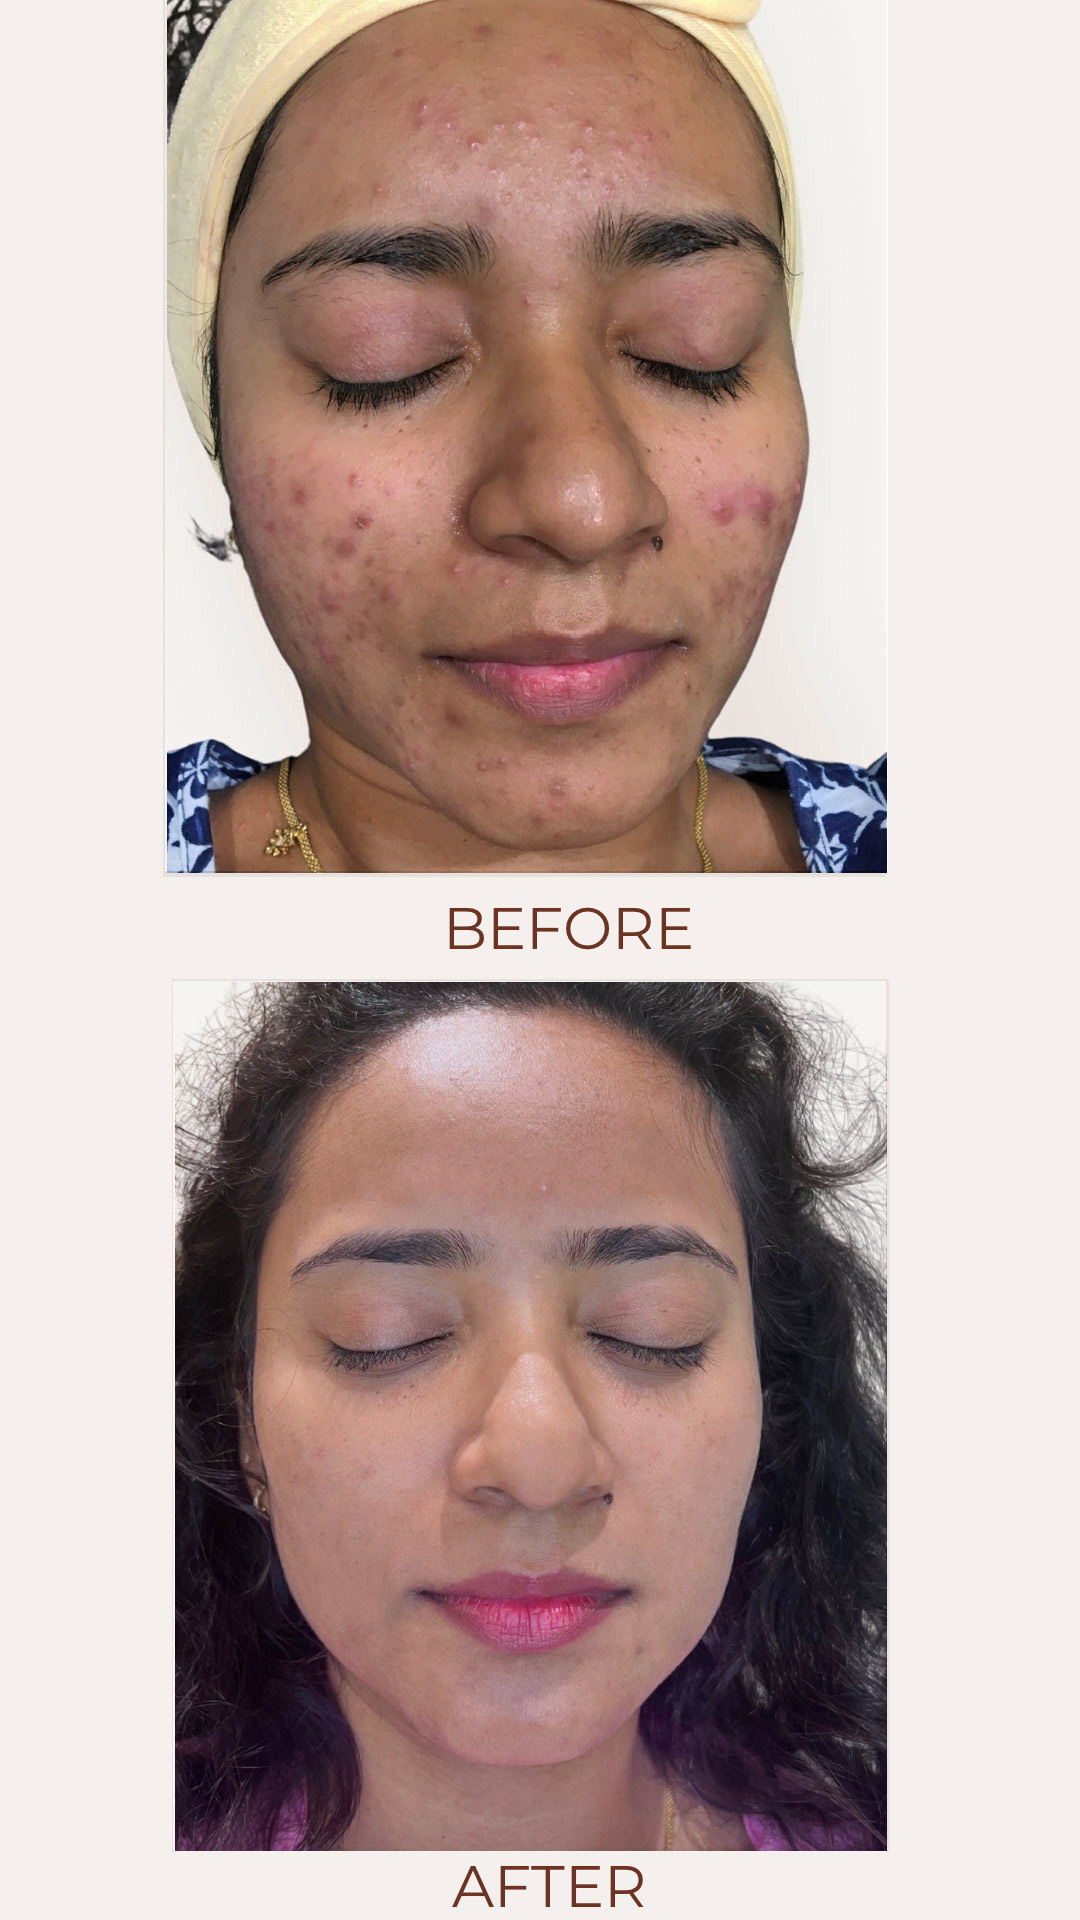 Before and after images showcasing the transformative results of The Skin Firm's Intense Acne Treatment at NIBM, revealing clear, healthy skin and reduced acne scars.